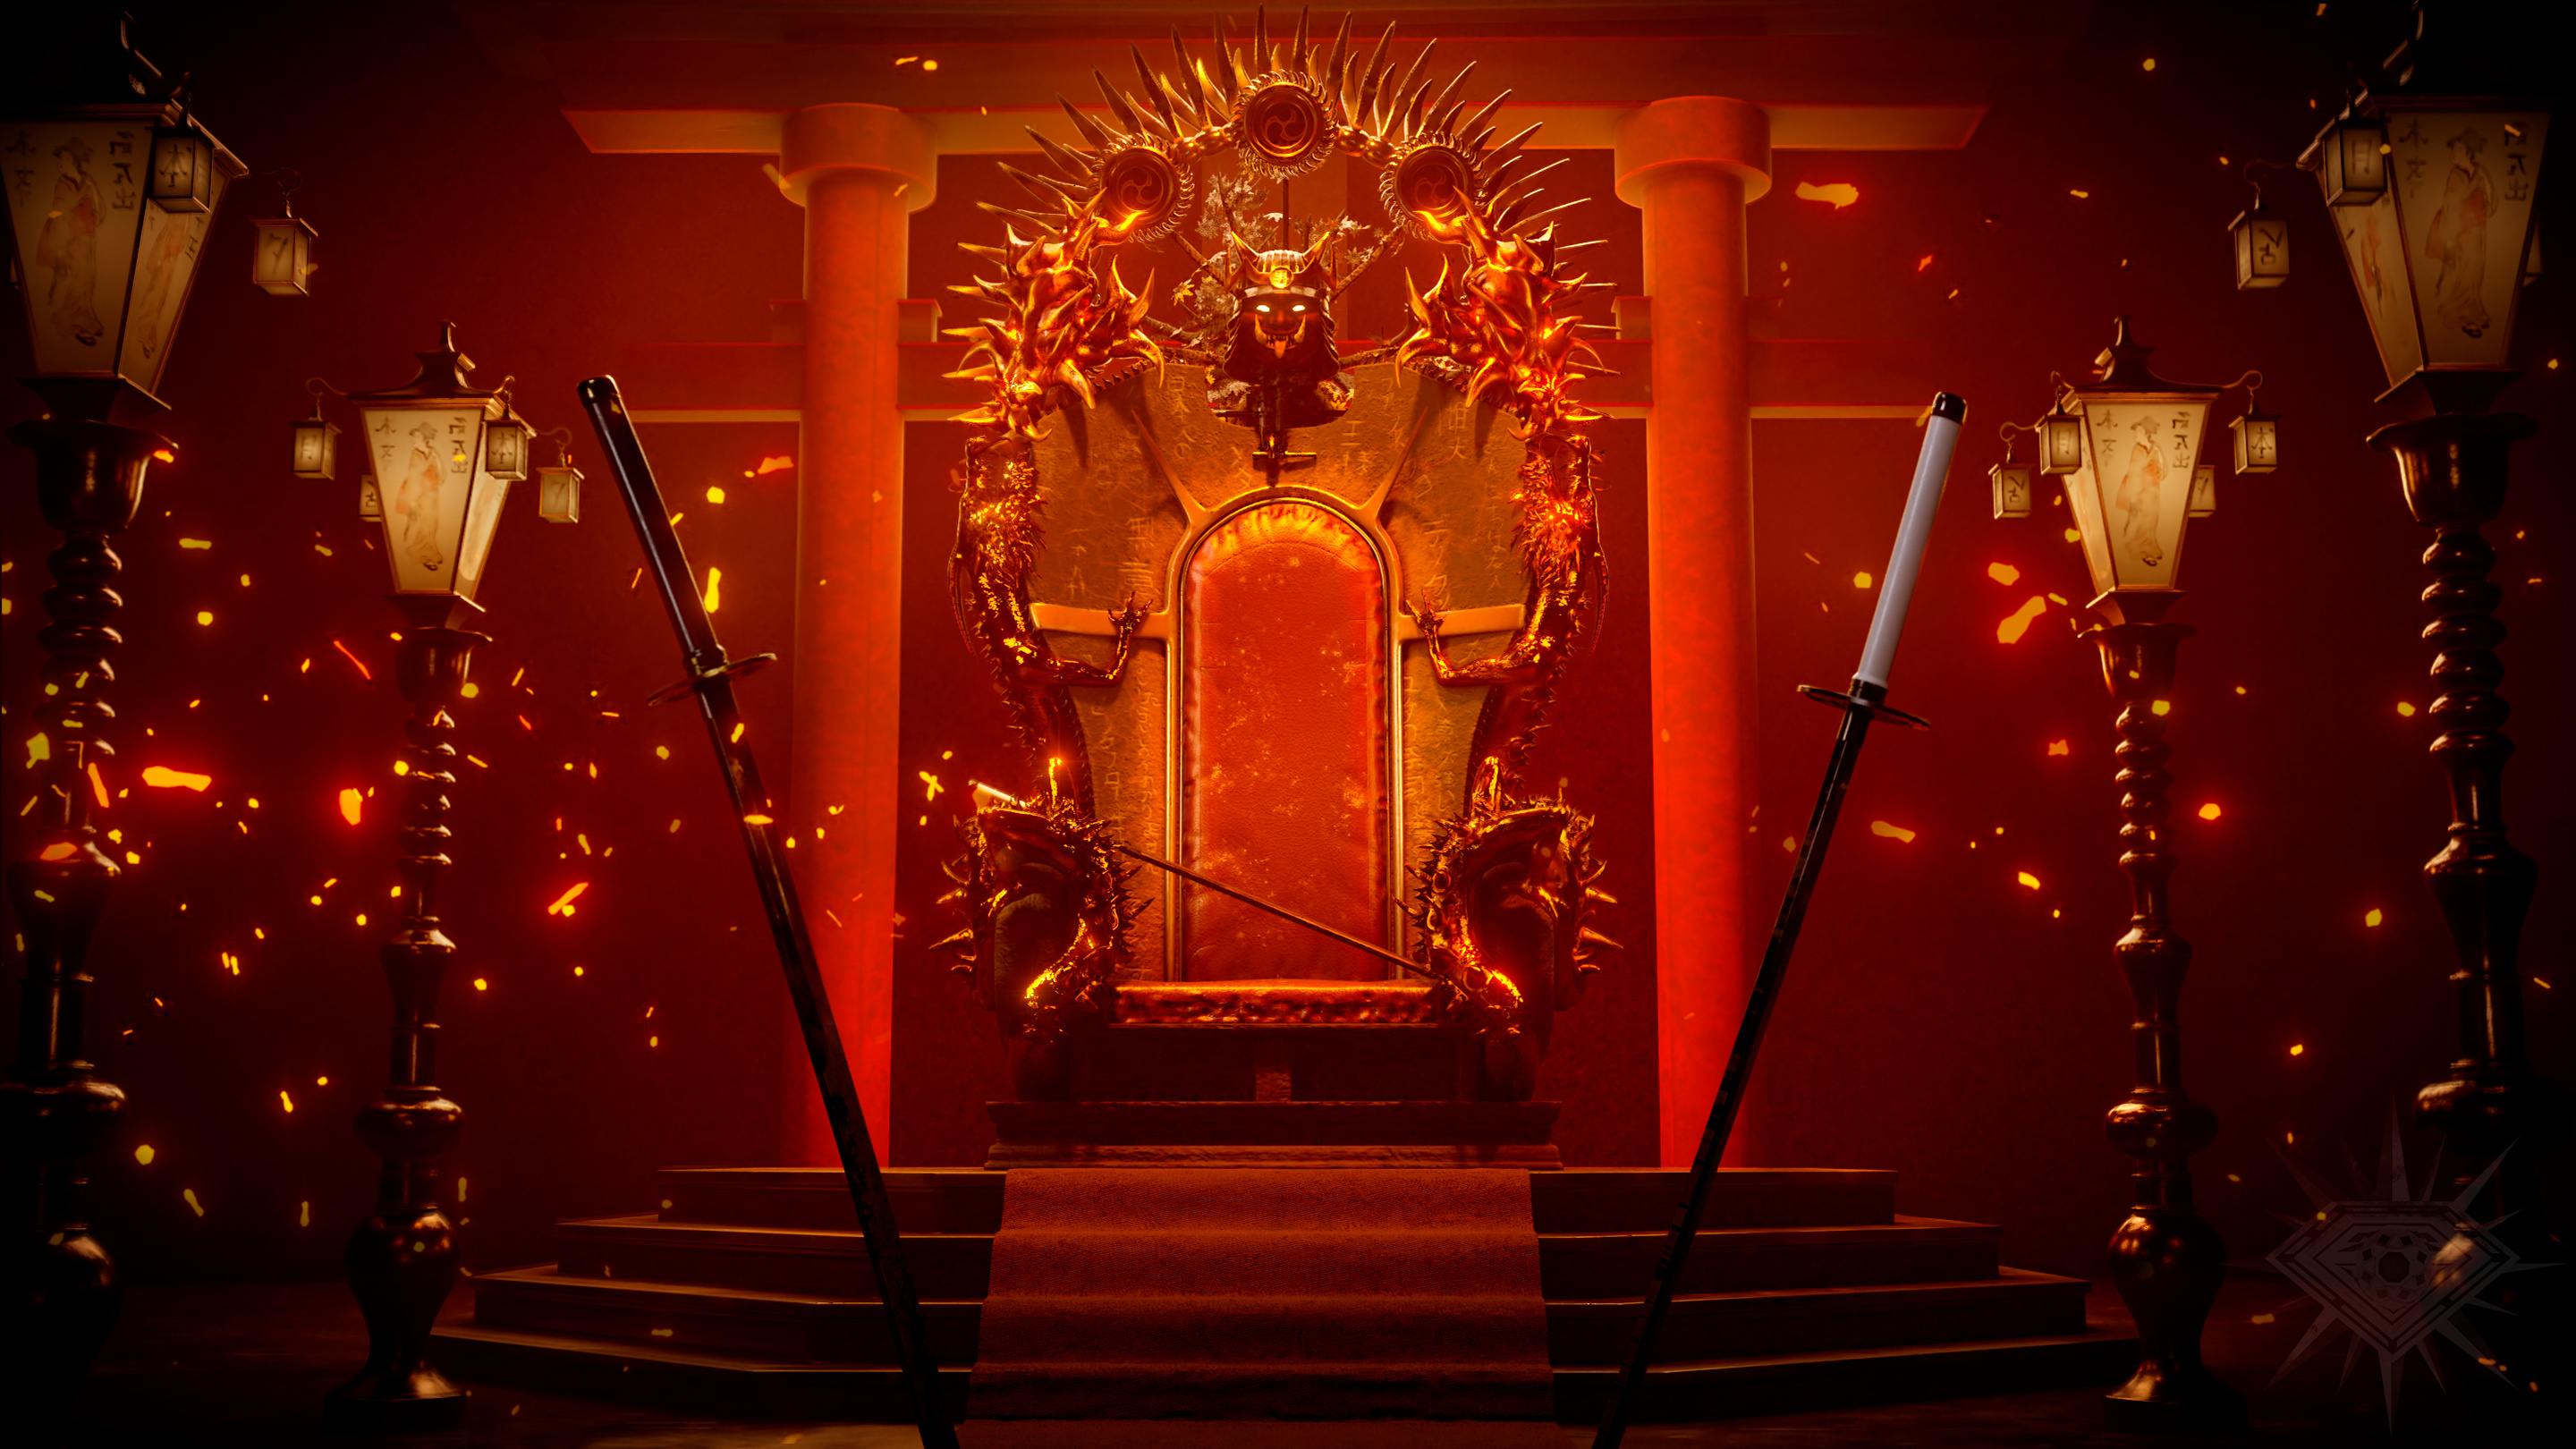 Japanese styled throne room - Finished Projects - Blender Artists Community